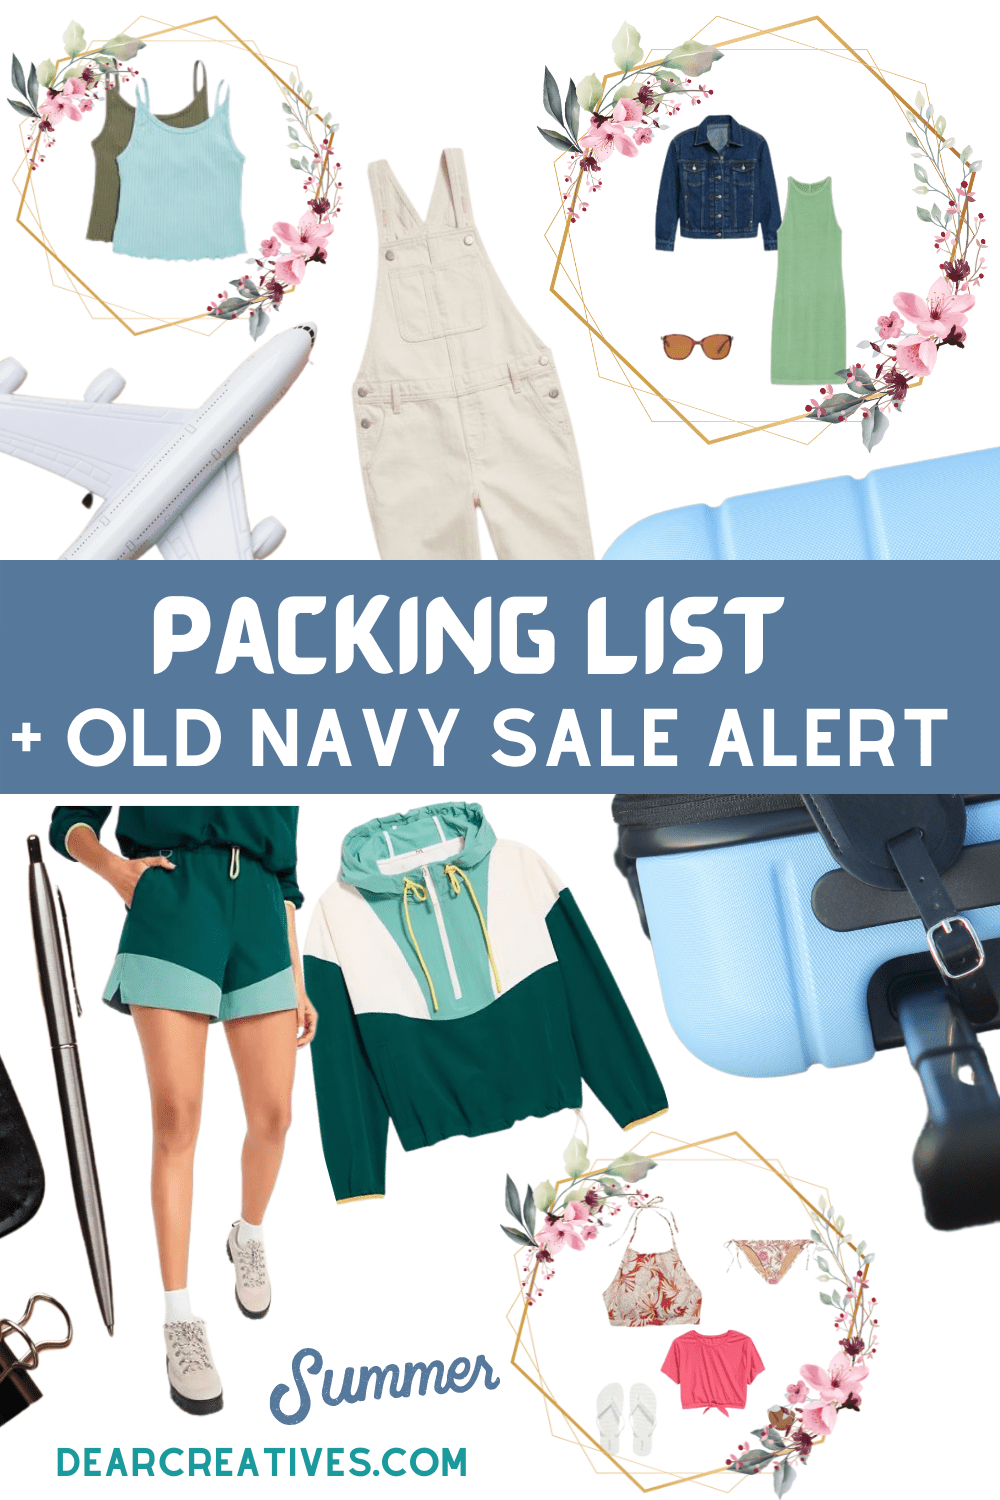 Sale Must-Haves – Plus Packing List